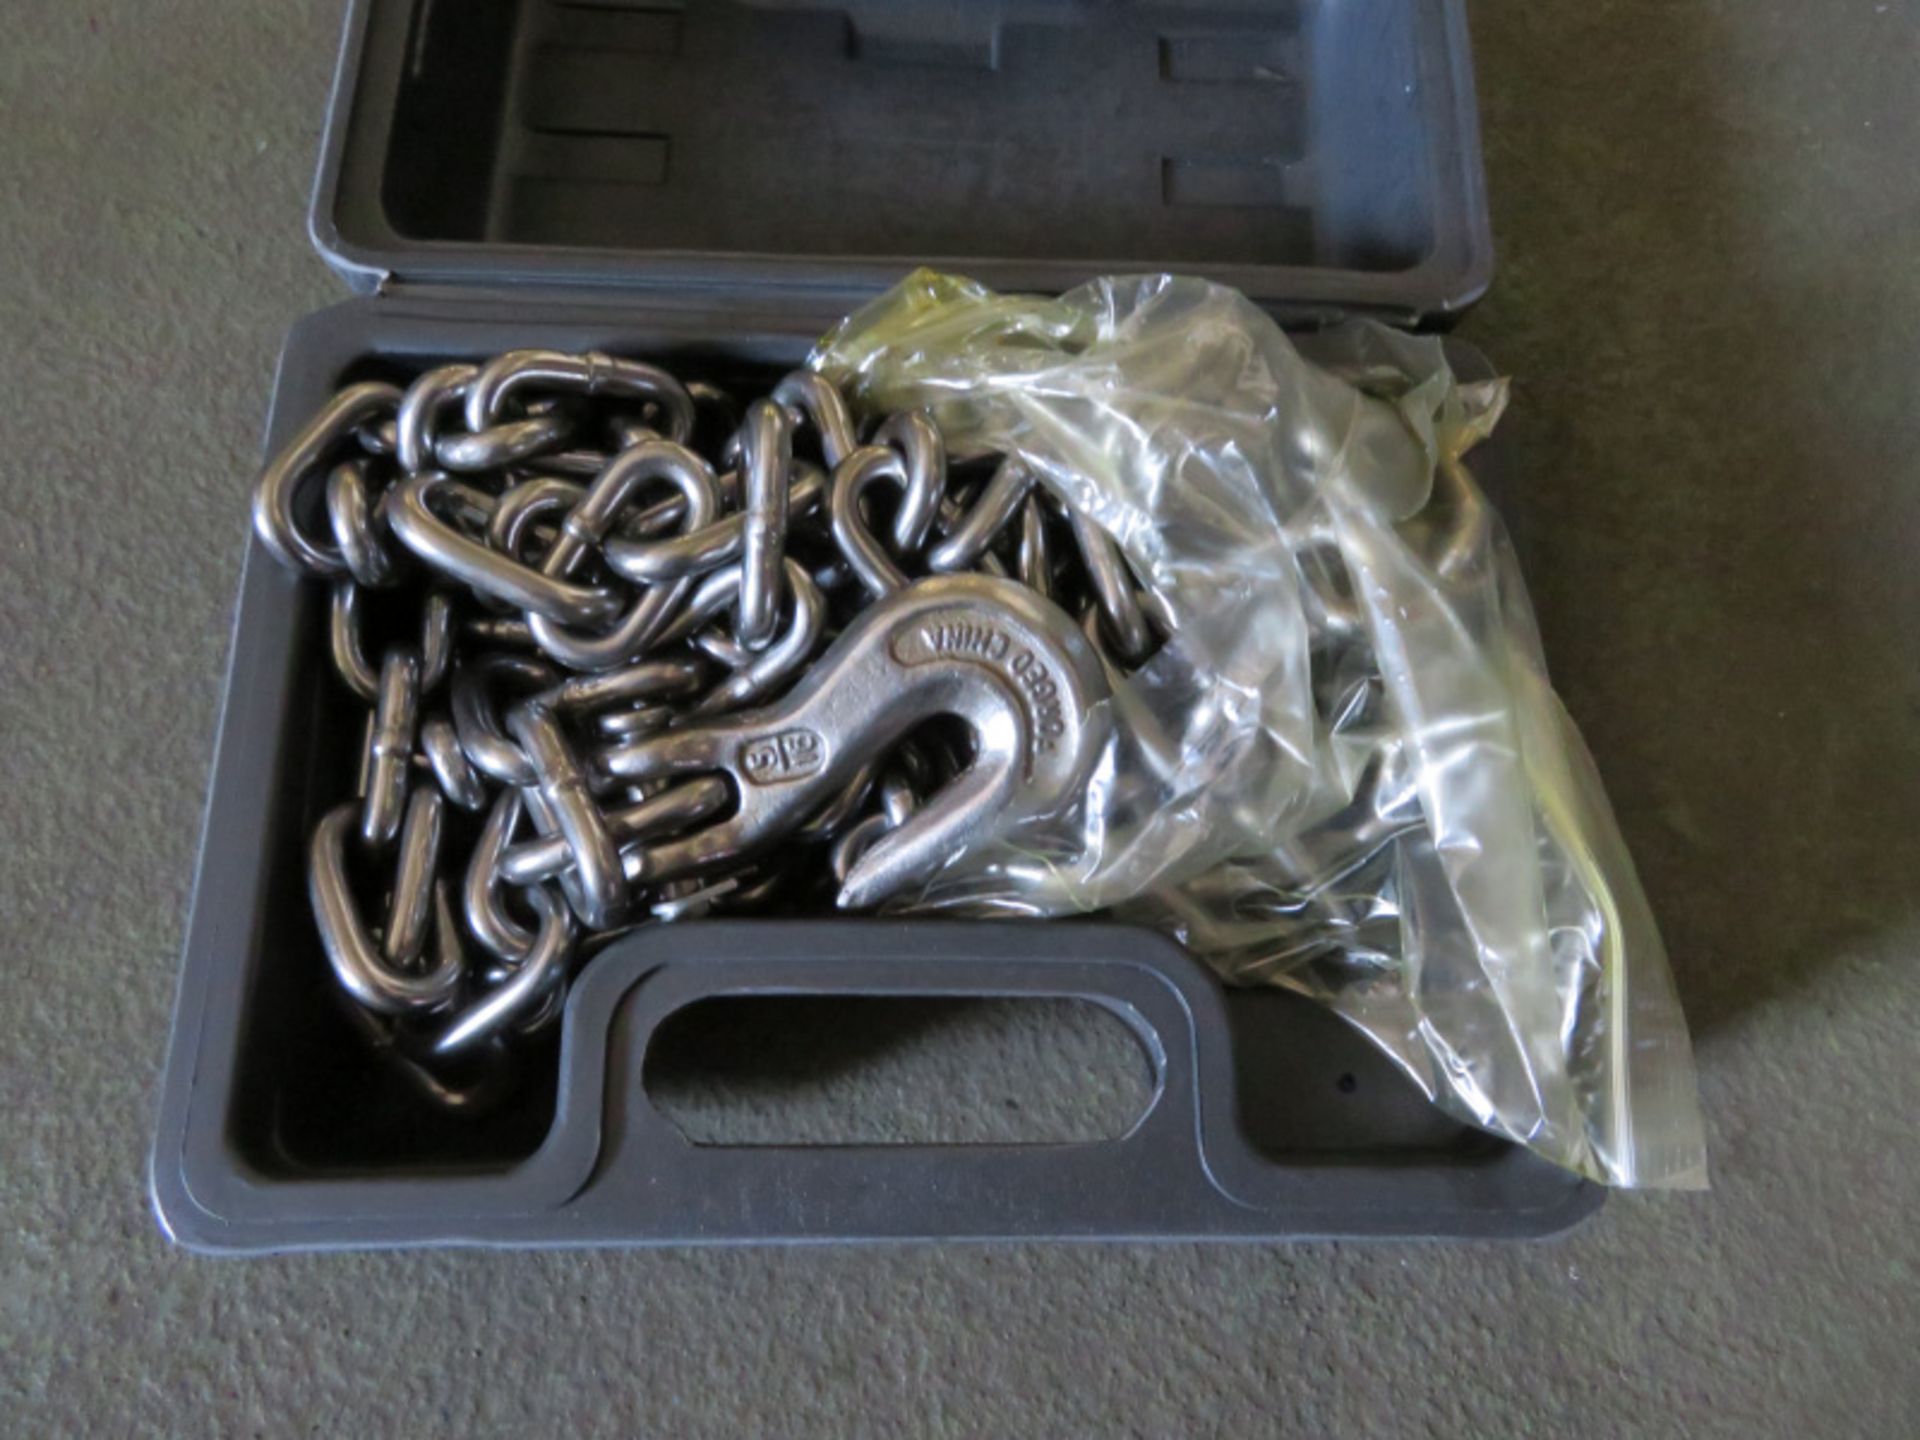 Marksman 14ft heavy duty utility chain with 5/16 inch hooks - Image 3 of 3